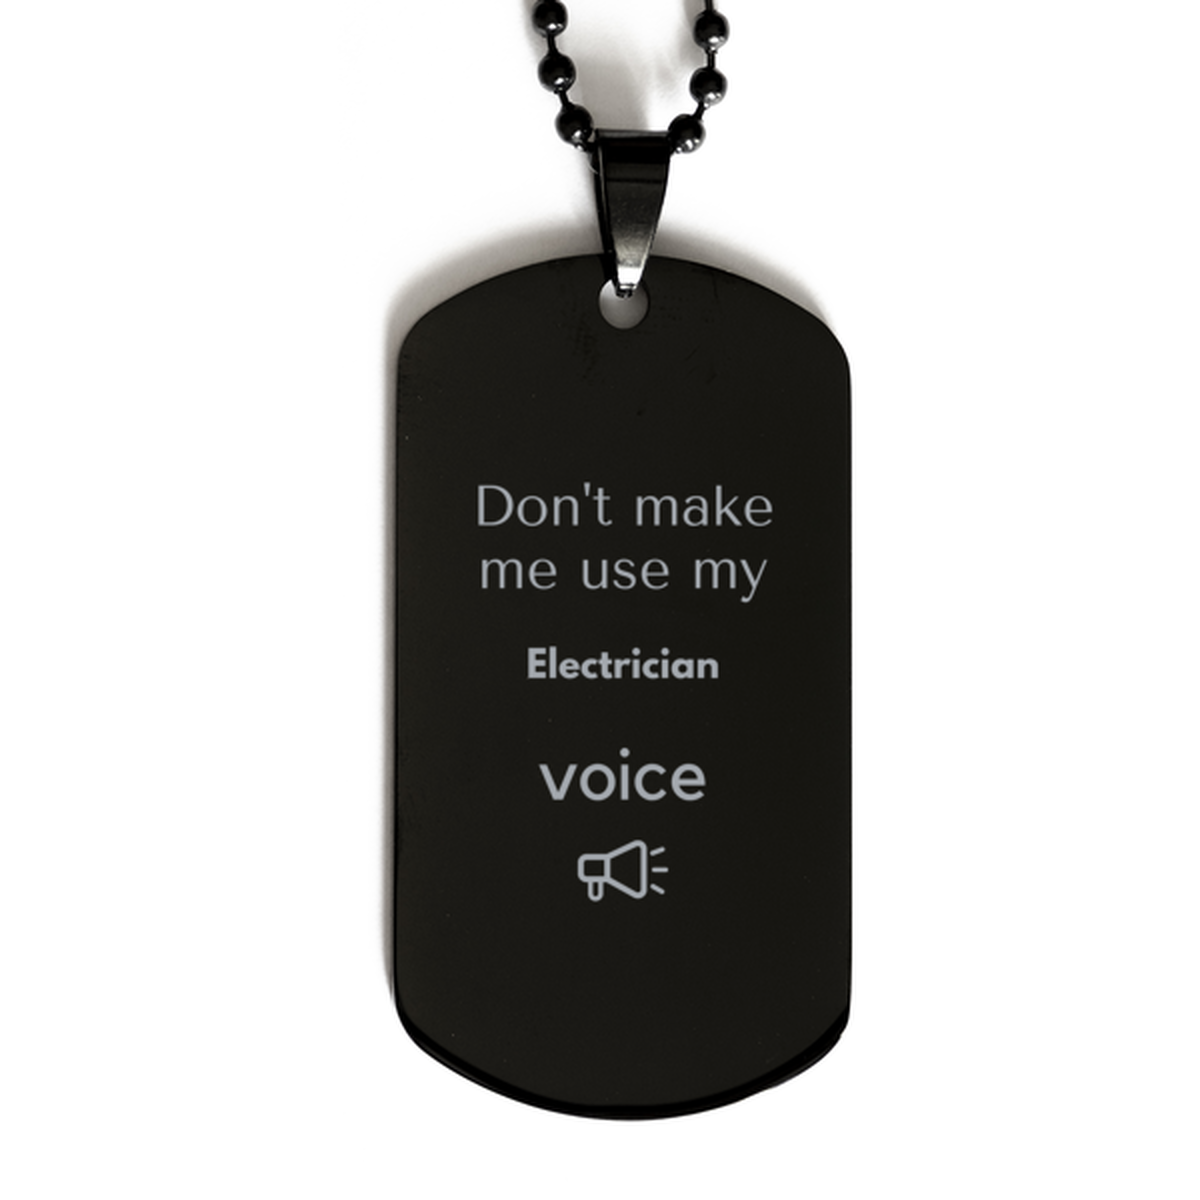 Don't make me use my Electrician voice, Sarcasm Electrician Gifts, Christmas Electrician Black Dog Tag Birthday Unique Gifts For Electrician Coworkers, Men, Women, Colleague, Friends